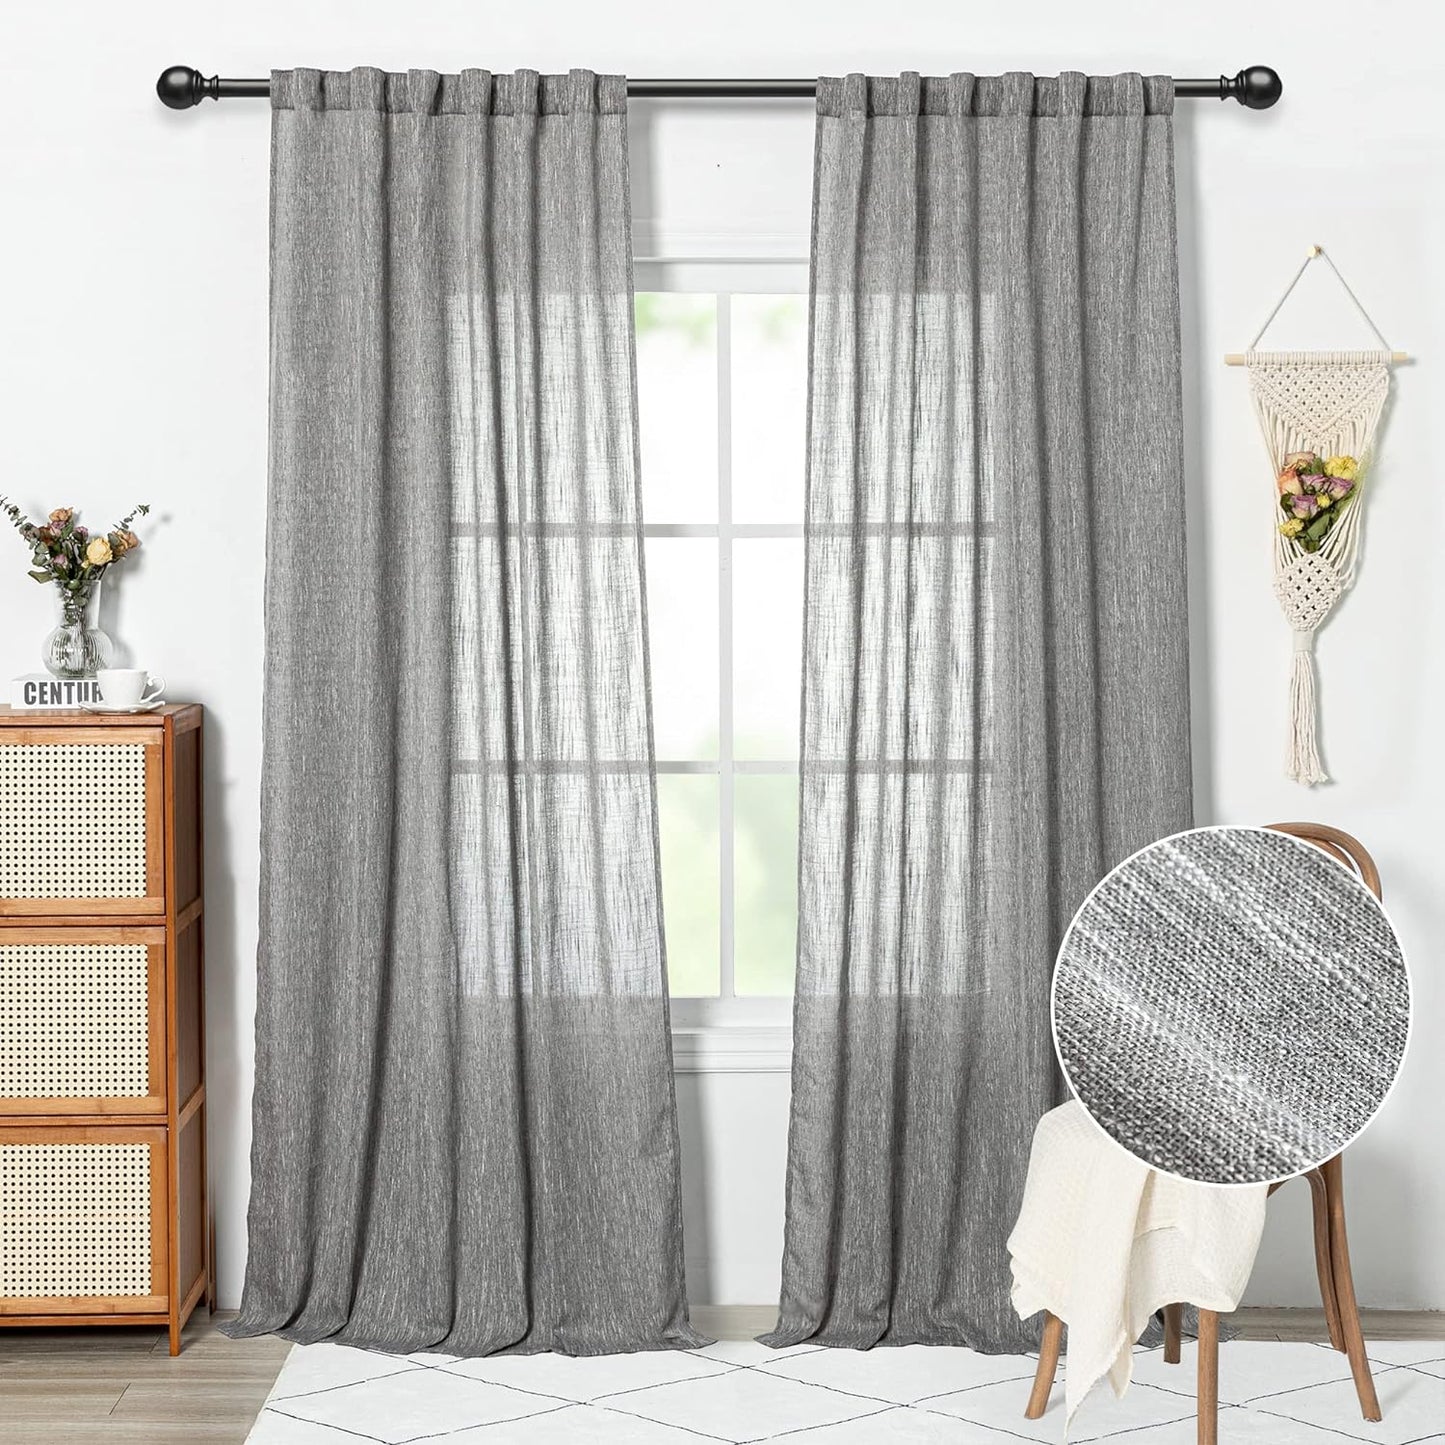 MYSKY HOME 90 Inch Curtains for Sliding Glass Door Windows, Living Room Decoration Cotton Drapes Soft Comfortable Touch Farmhouse Country Patio Treatment Set, 50" Width, Natural, 2 Panels  MYSKYTEX Dark Grey 50"W X 108"L 